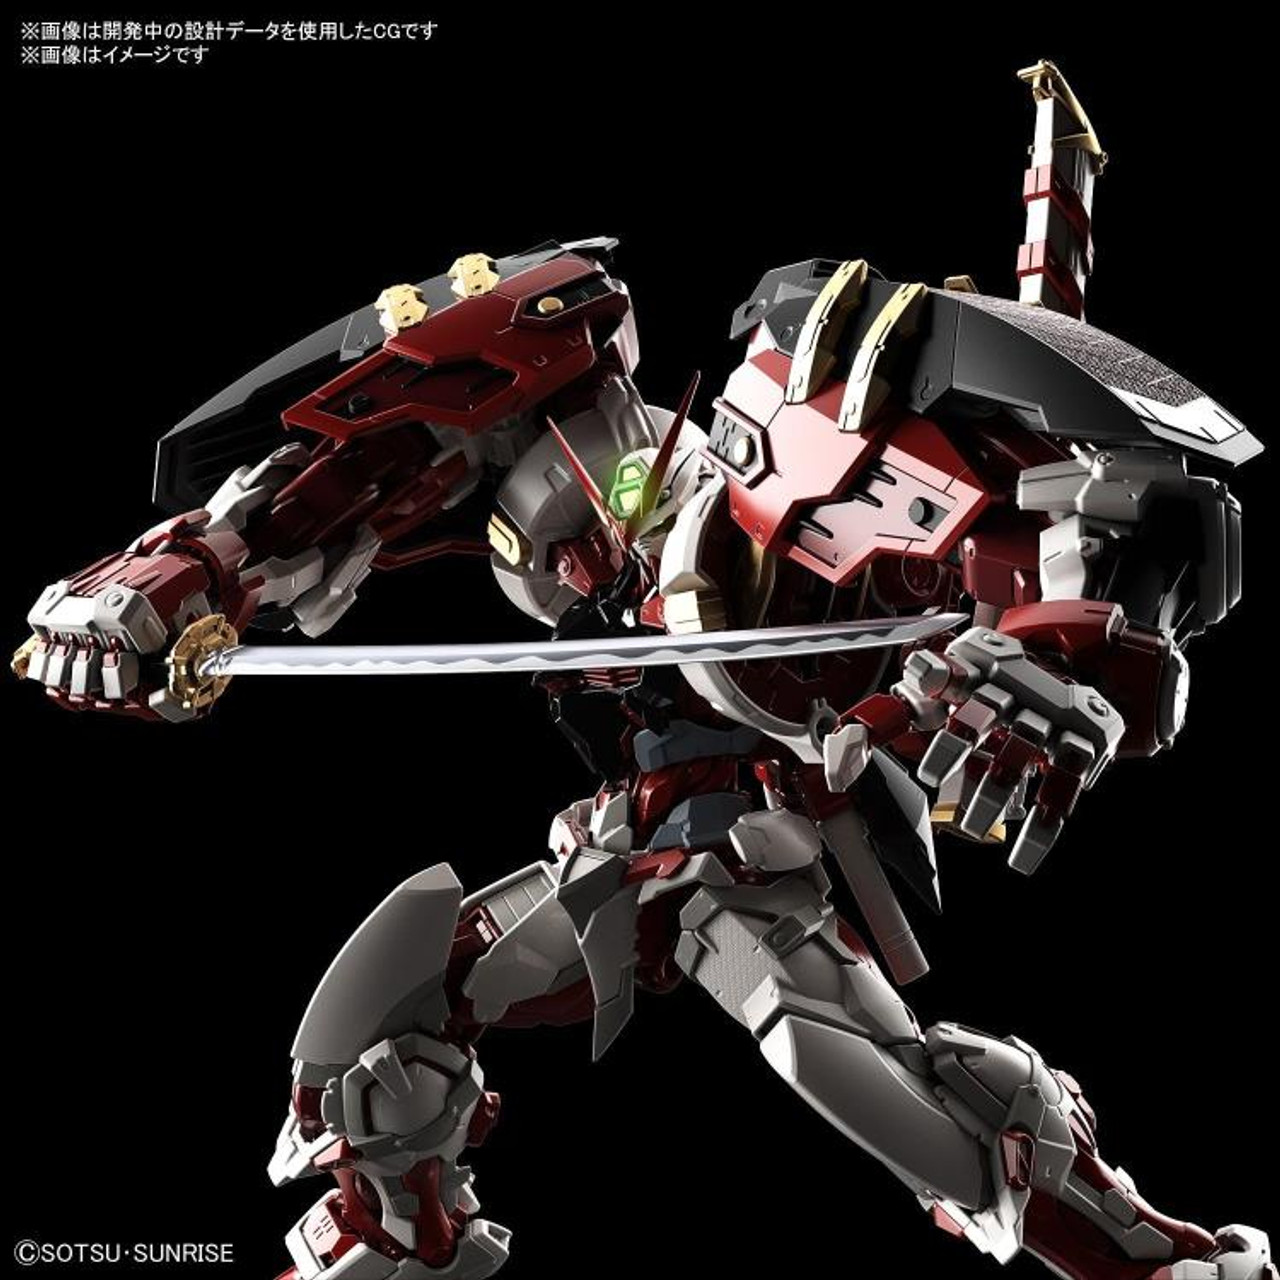 Hi-RM #006 - Gundam Astray Red Frame Powered Red "Mobile Suit Gundam SEED ASTRAY" Hi-Resolution Model